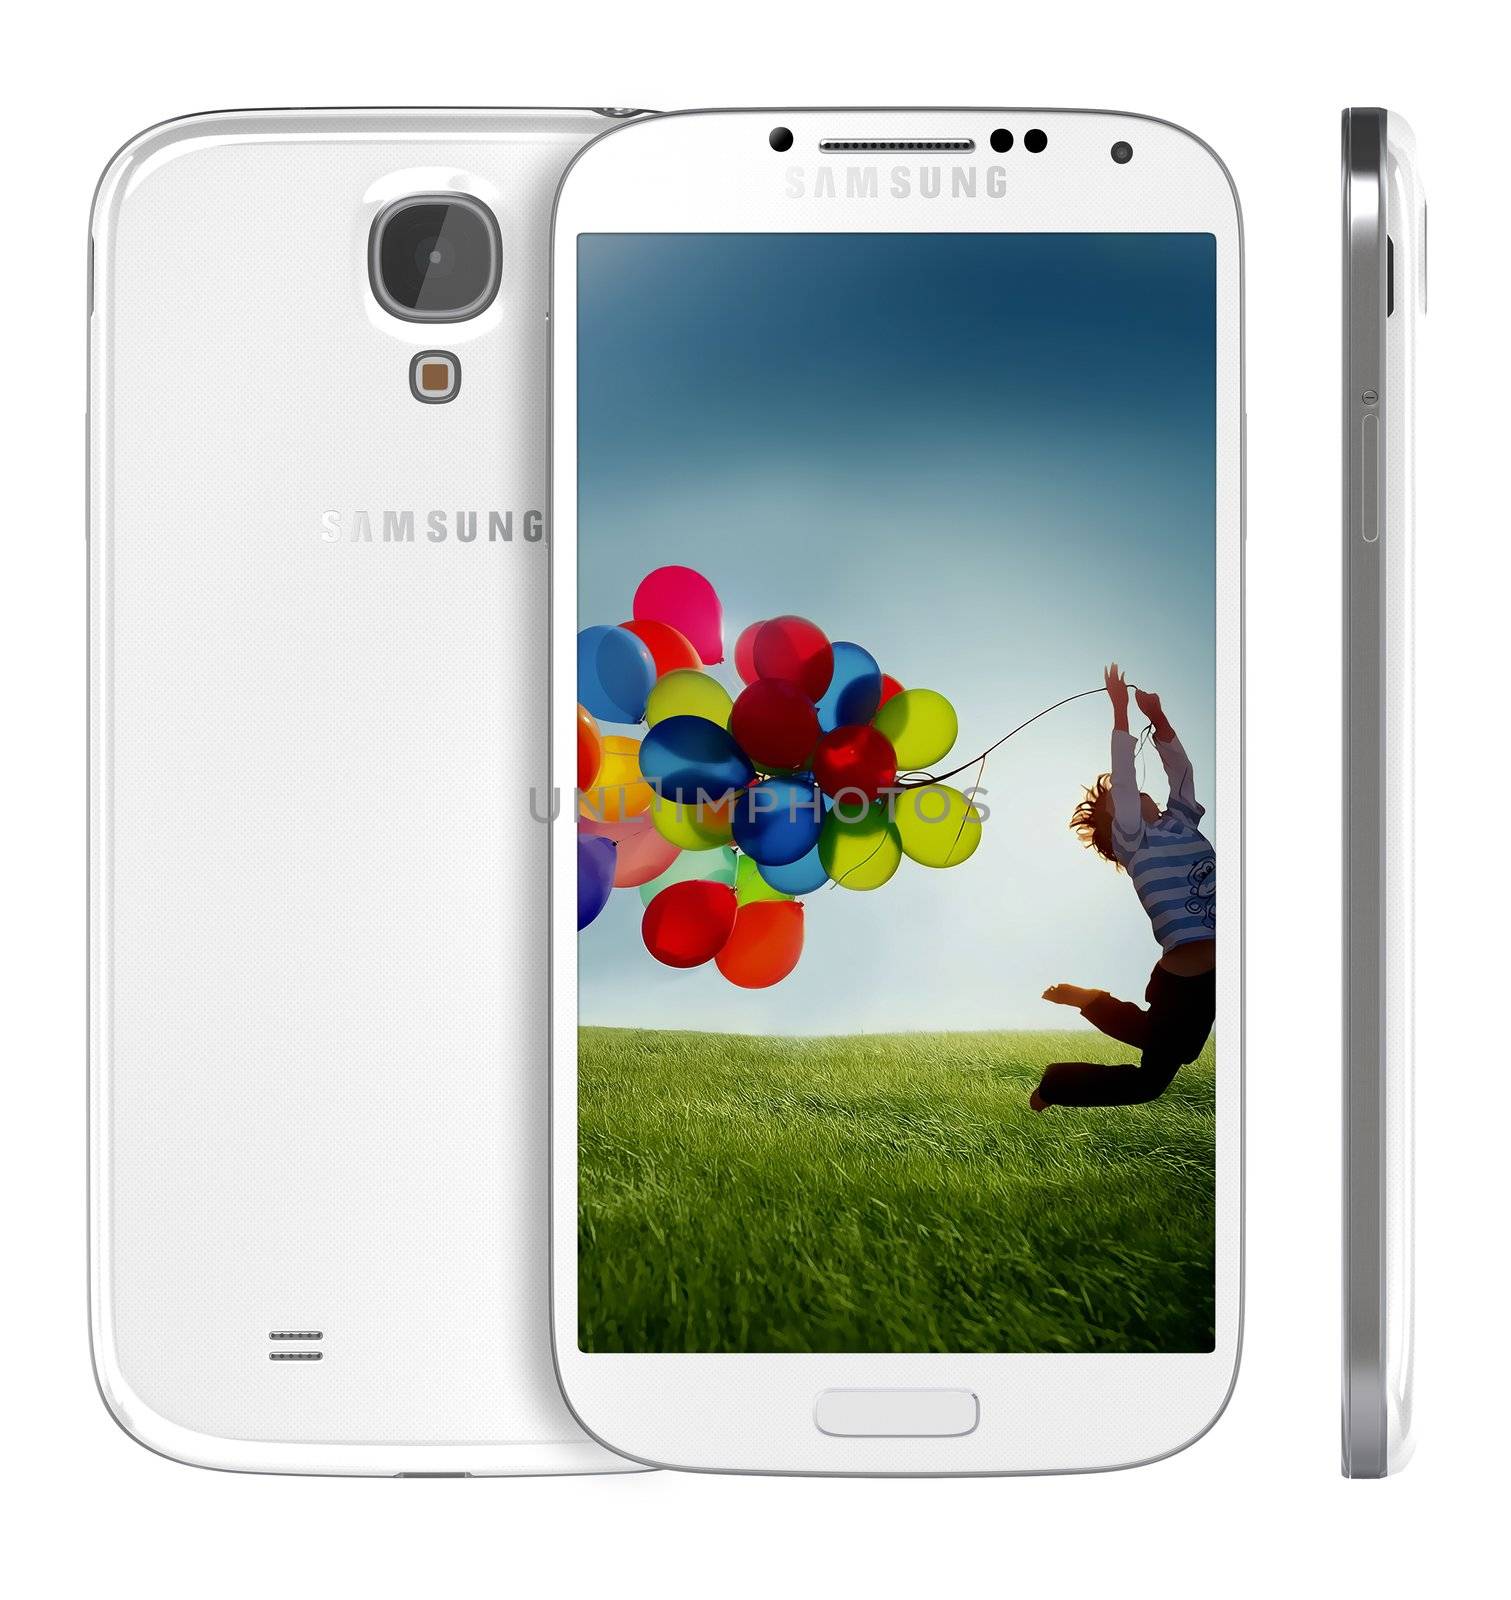 Galati, Romania - April 14, 2013: The Samsung Galaxy S4 handset steadily draws from the same design language as the S3, but takes almost every spec to an extreme -- the screen is larger, the processor faster and the rear-facing camera stuffed with more megapixels.